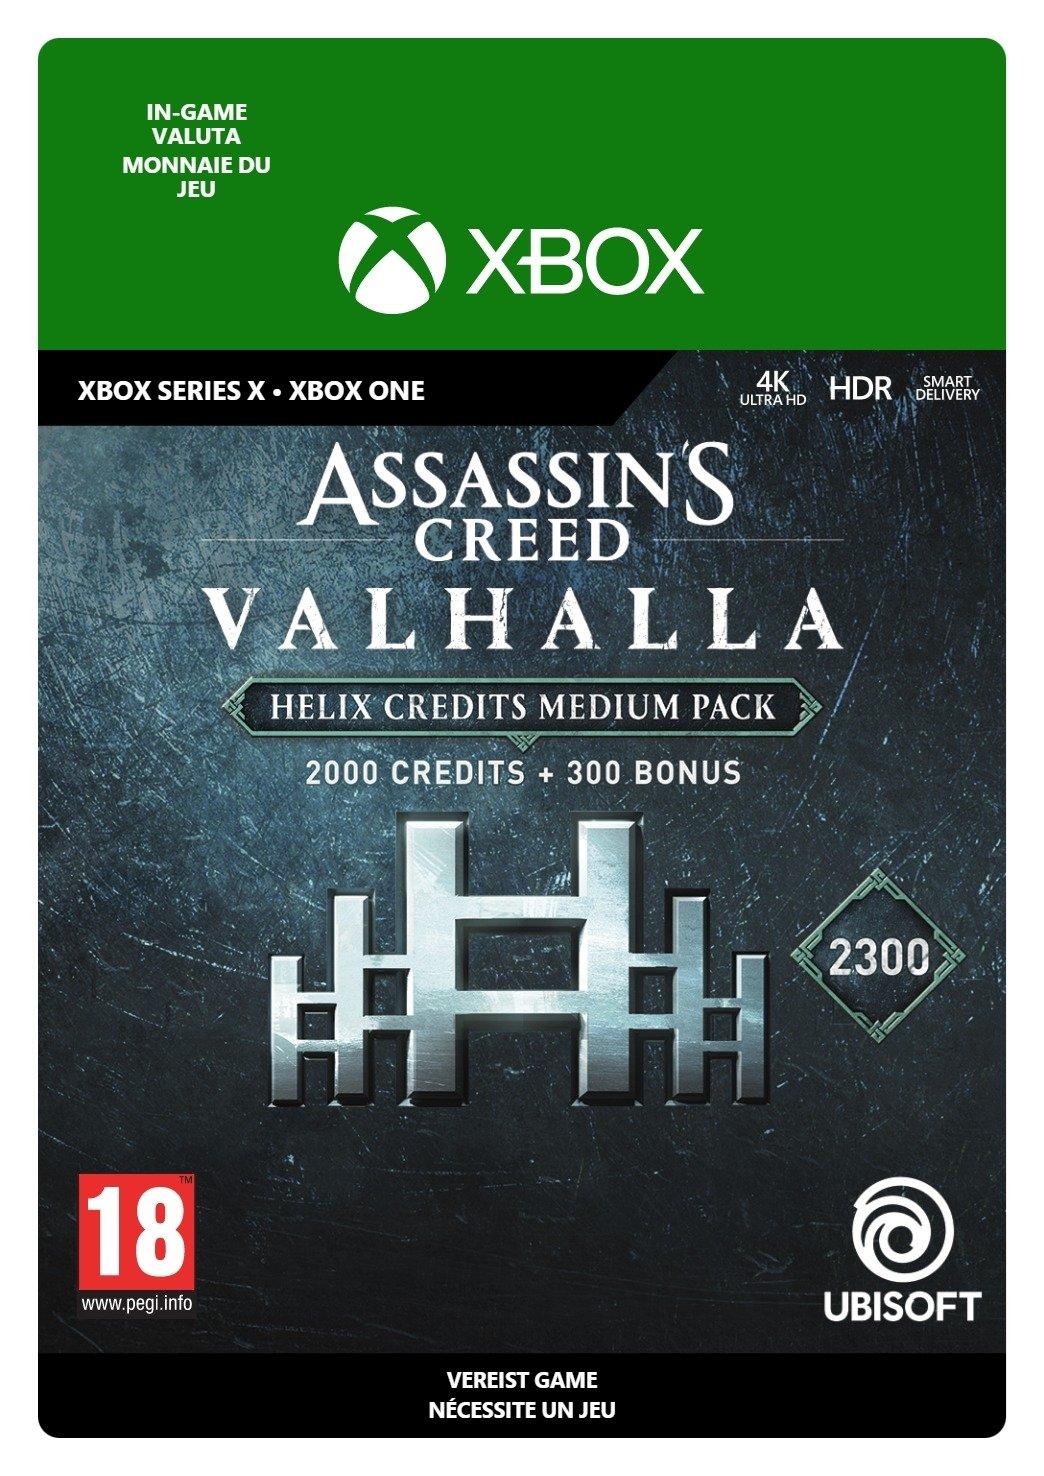 Assassin's Creed Valhalla Medium Helix Credits Pack - Xbox Series X/Xbox One - Currency | 7F6-00269 (b59a7cd5-a0c3-f54f-b114-71586314e439)